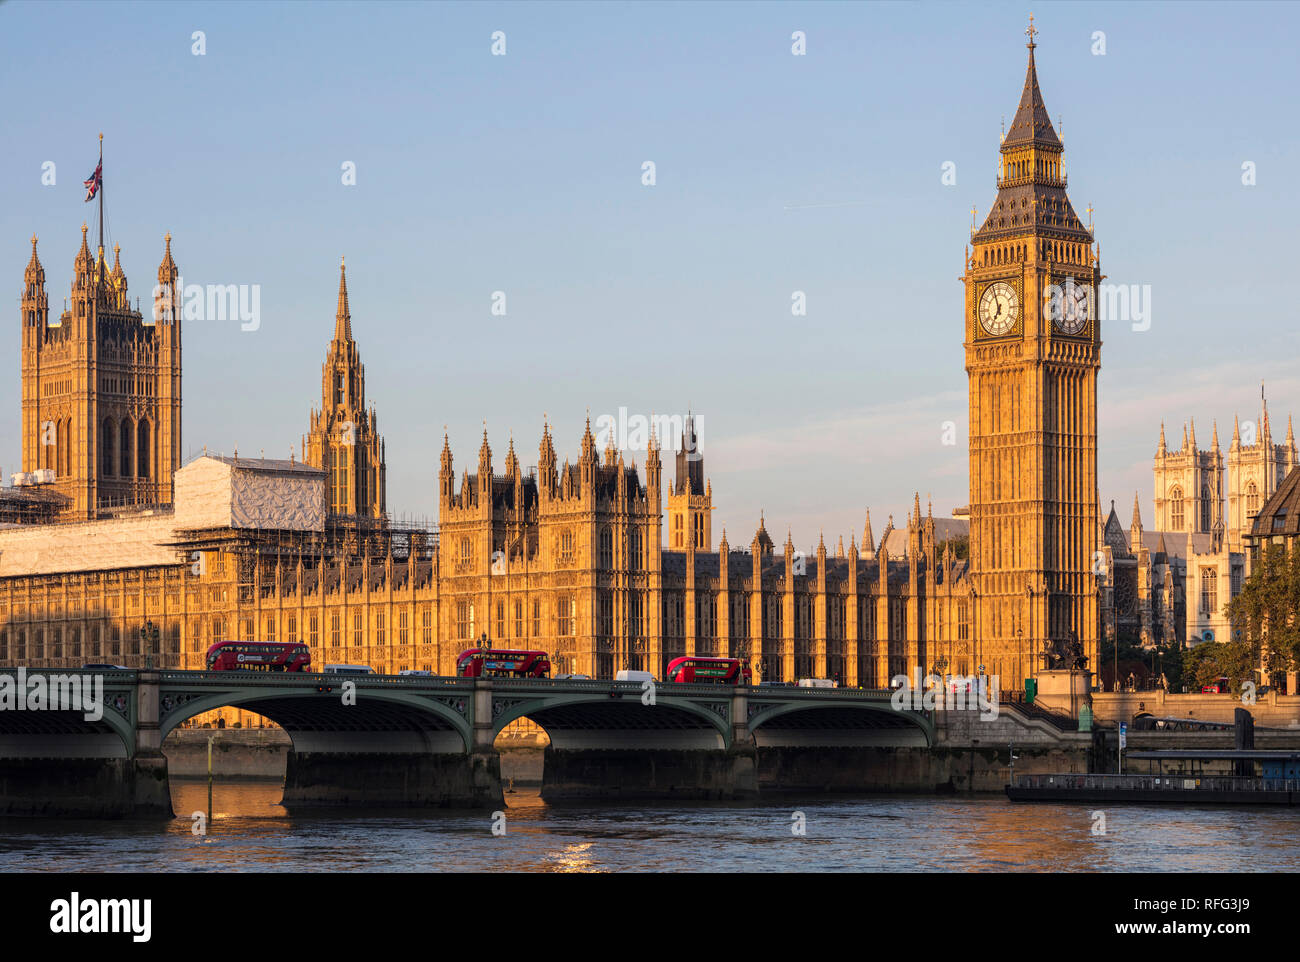 Big Ben And the Palace of Westminster Stock Photo